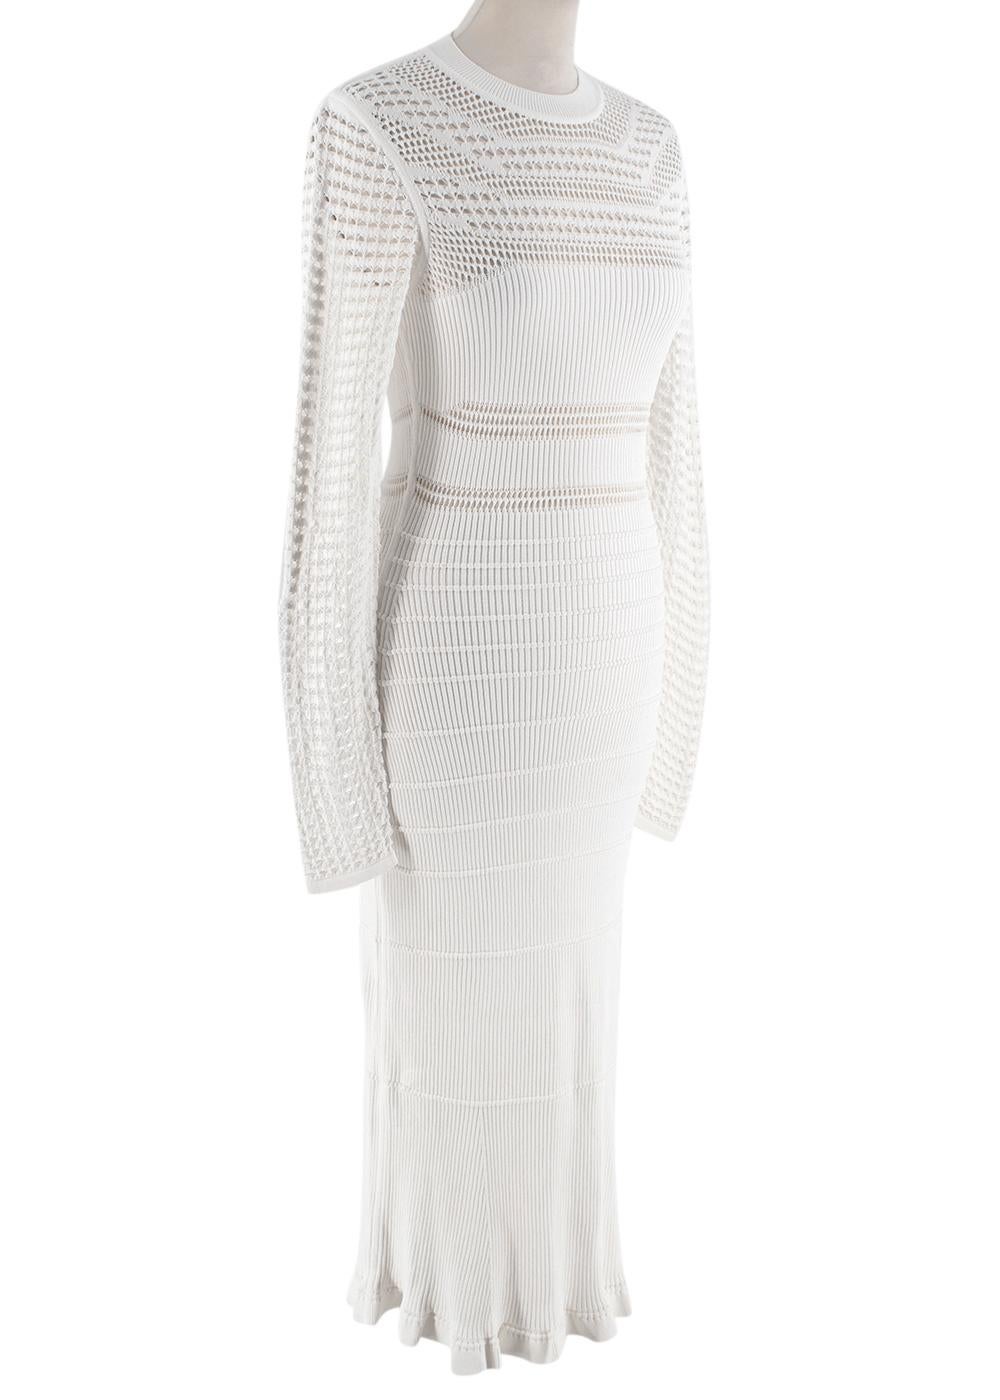 Narciso Rodriguez Paneled ribbed-knit midi dress

- Semi-sheer crocheted panels
- gently fluted hem
- Round neckline 
- Elasticated fabric 

Materials 
86% viscose, 14% polyester

Dry Clean Only

Made in China 

Measurements are taken laying flat,